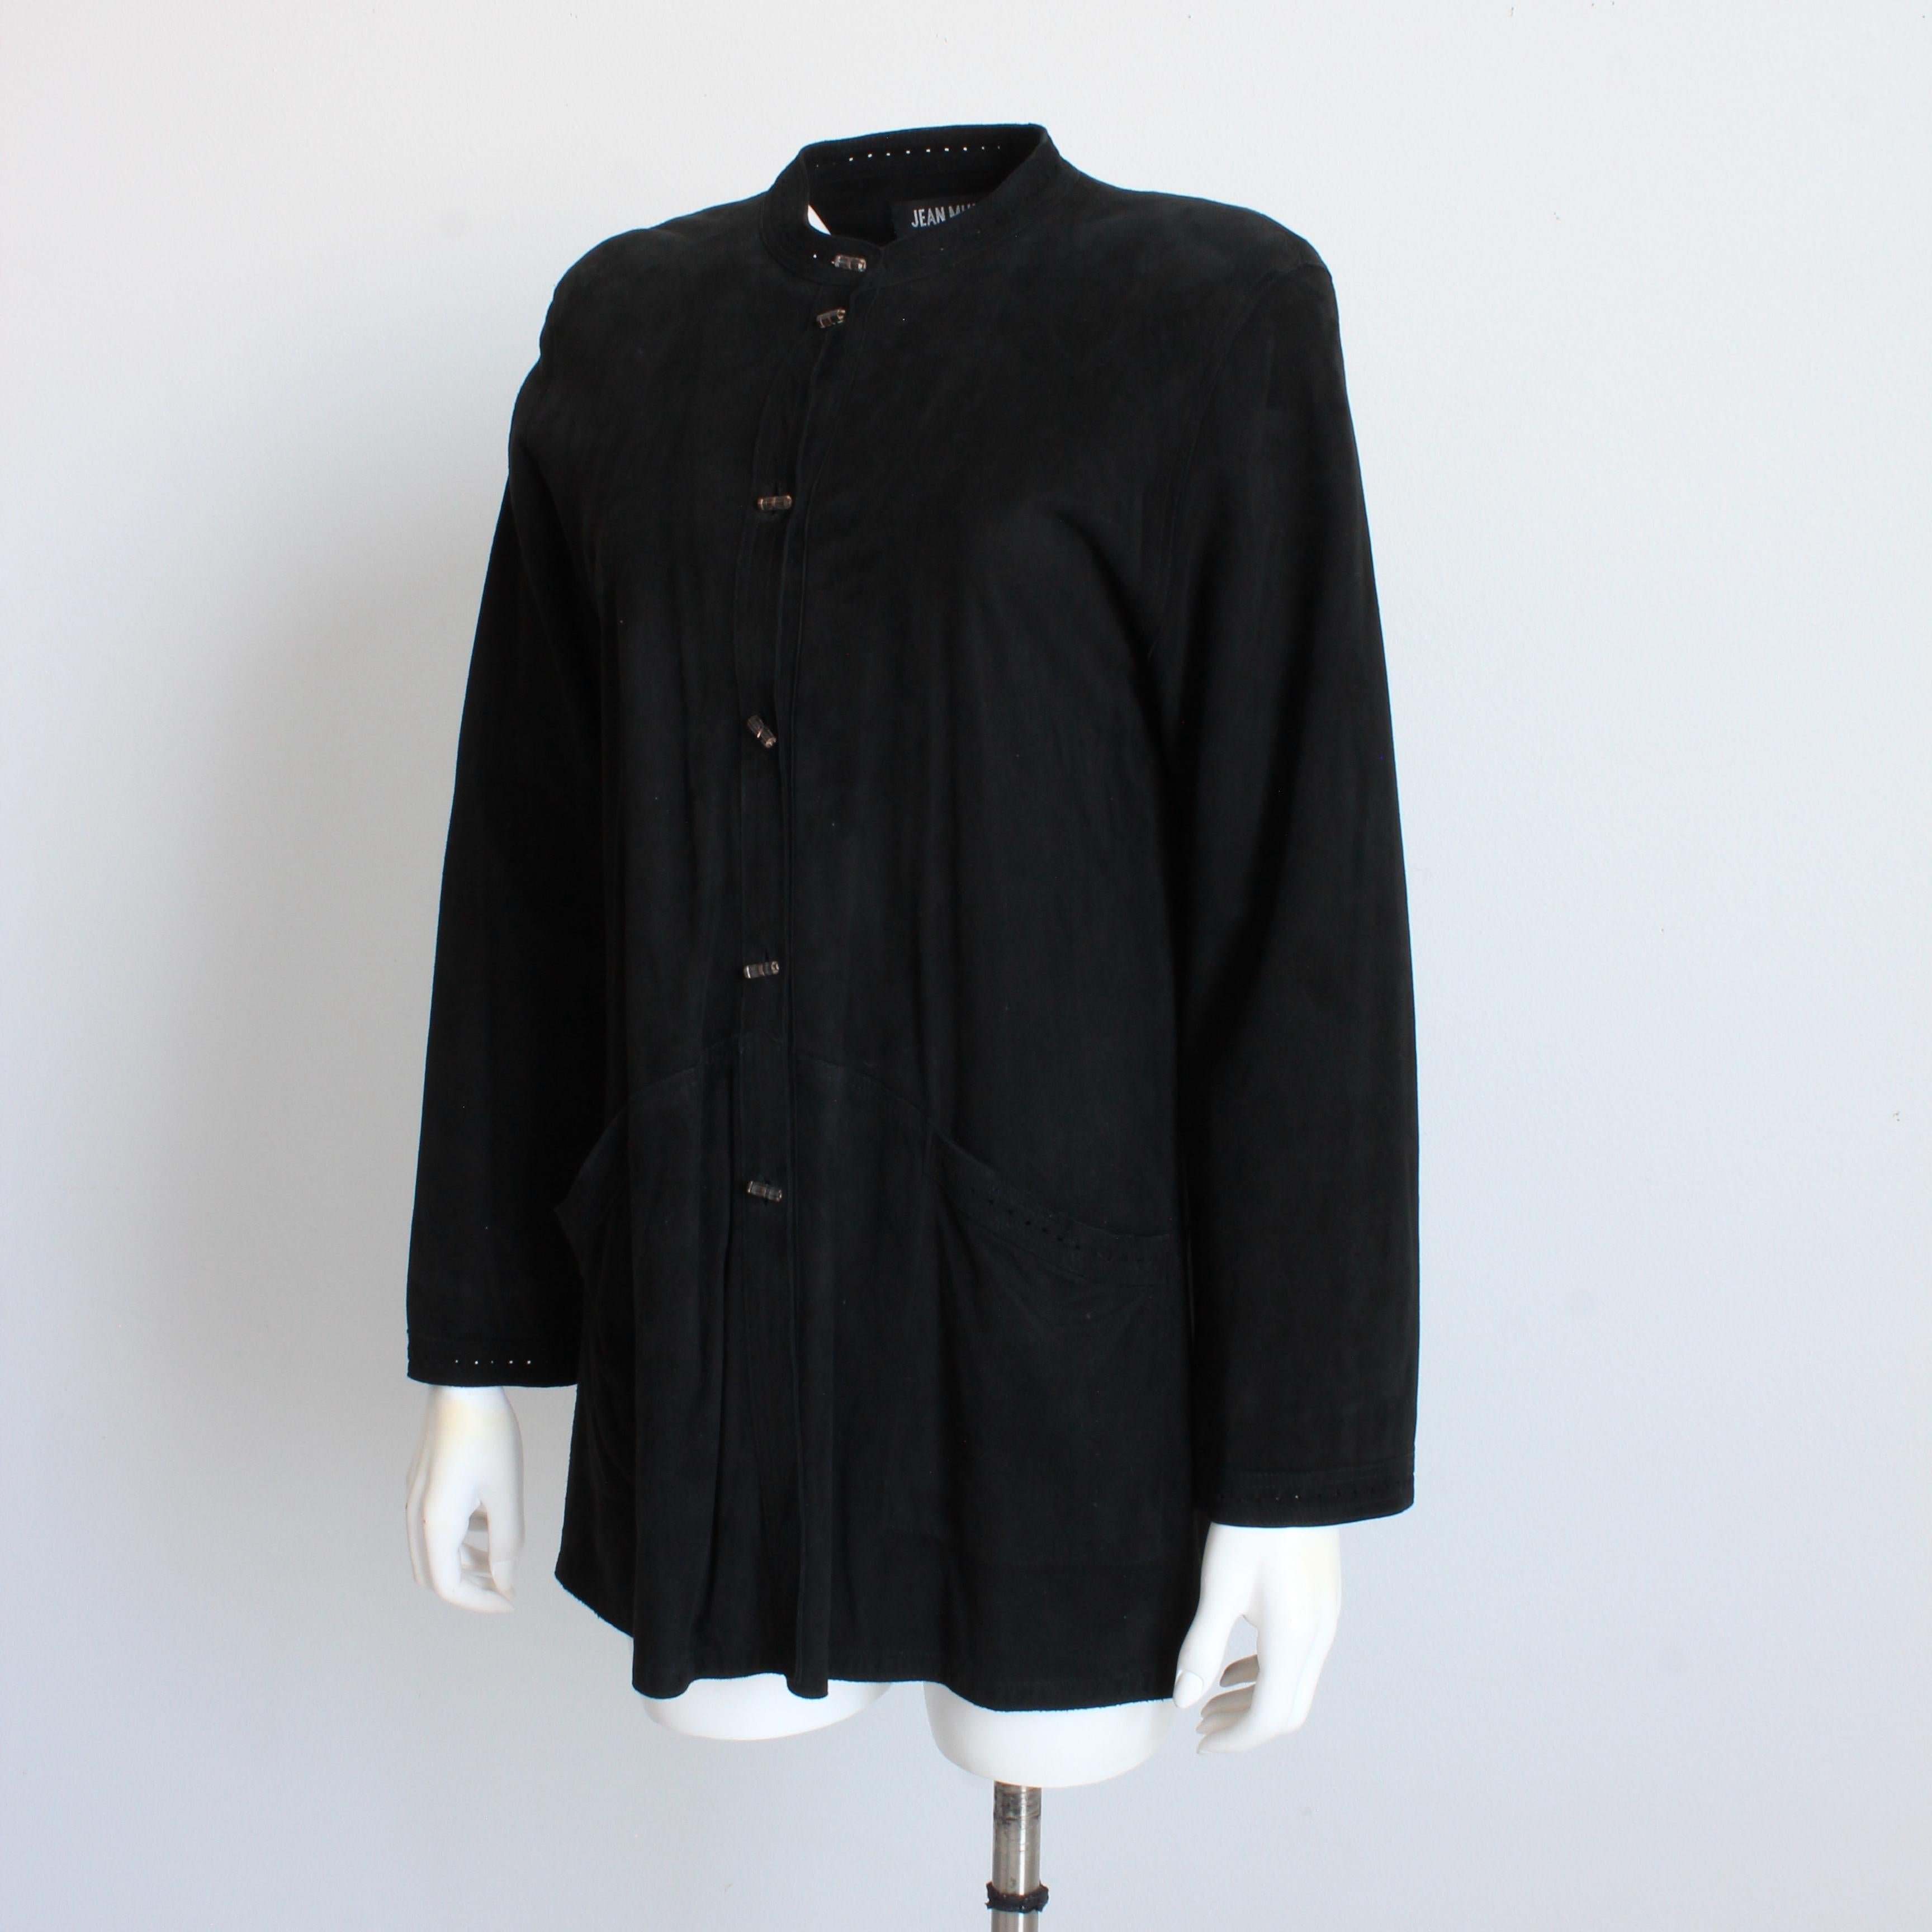 Jean Muir Black Suede Jacket with Perforated Trim and Lucite Buttons Vintage Sz8 For Sale 1